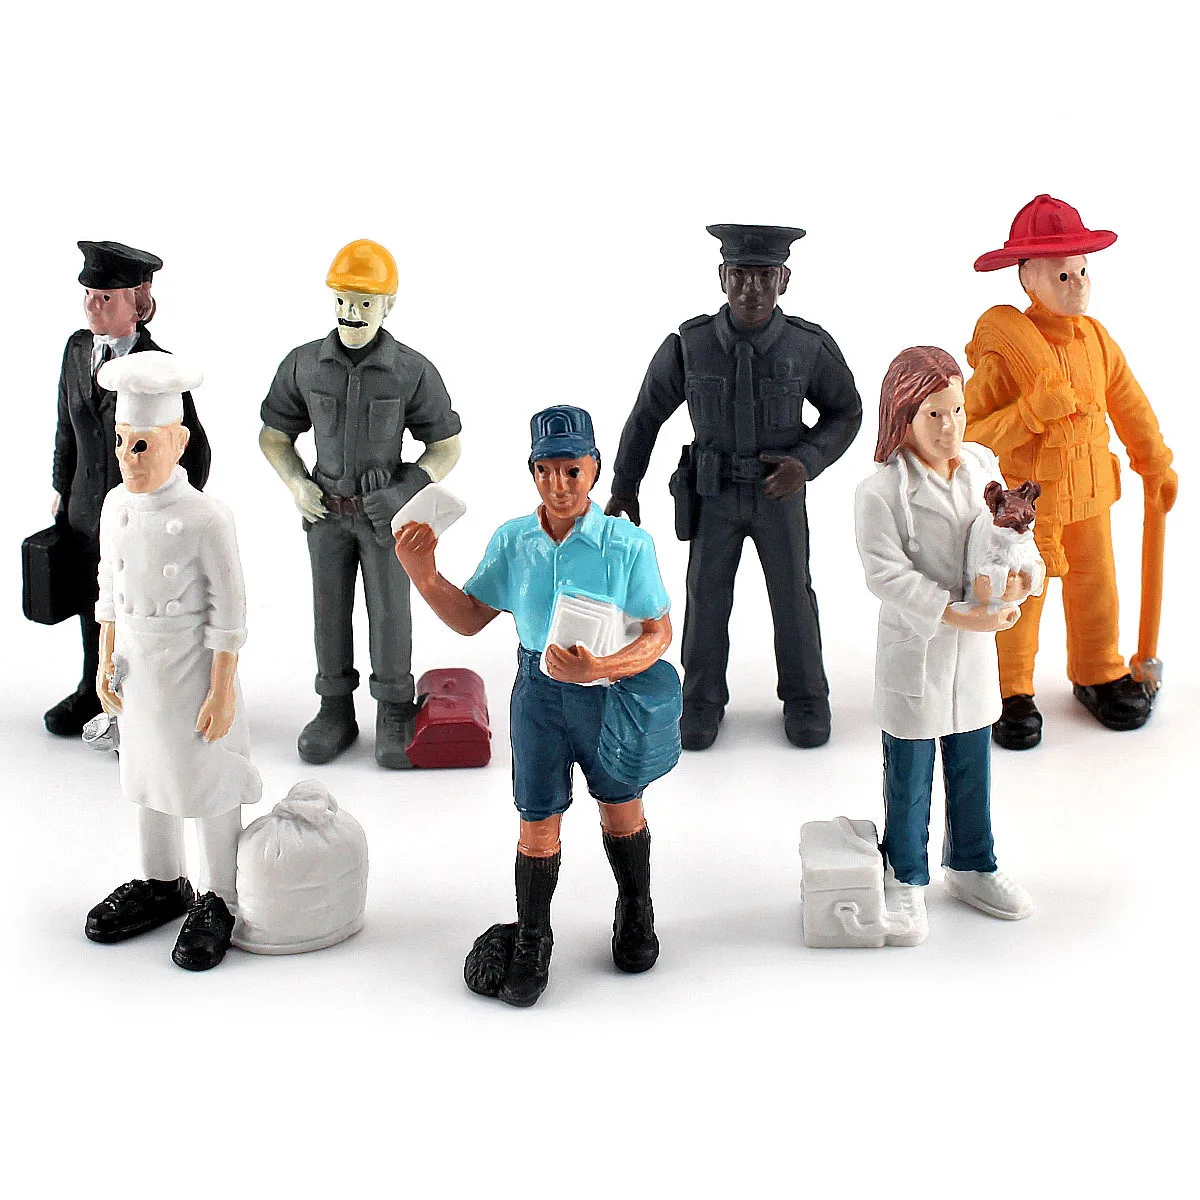 

7Pcs Realistic Hand-Painted People Figurines Toy Fireman Police ,Postman Pilot Baker People Action Figures Model Toy for Kids